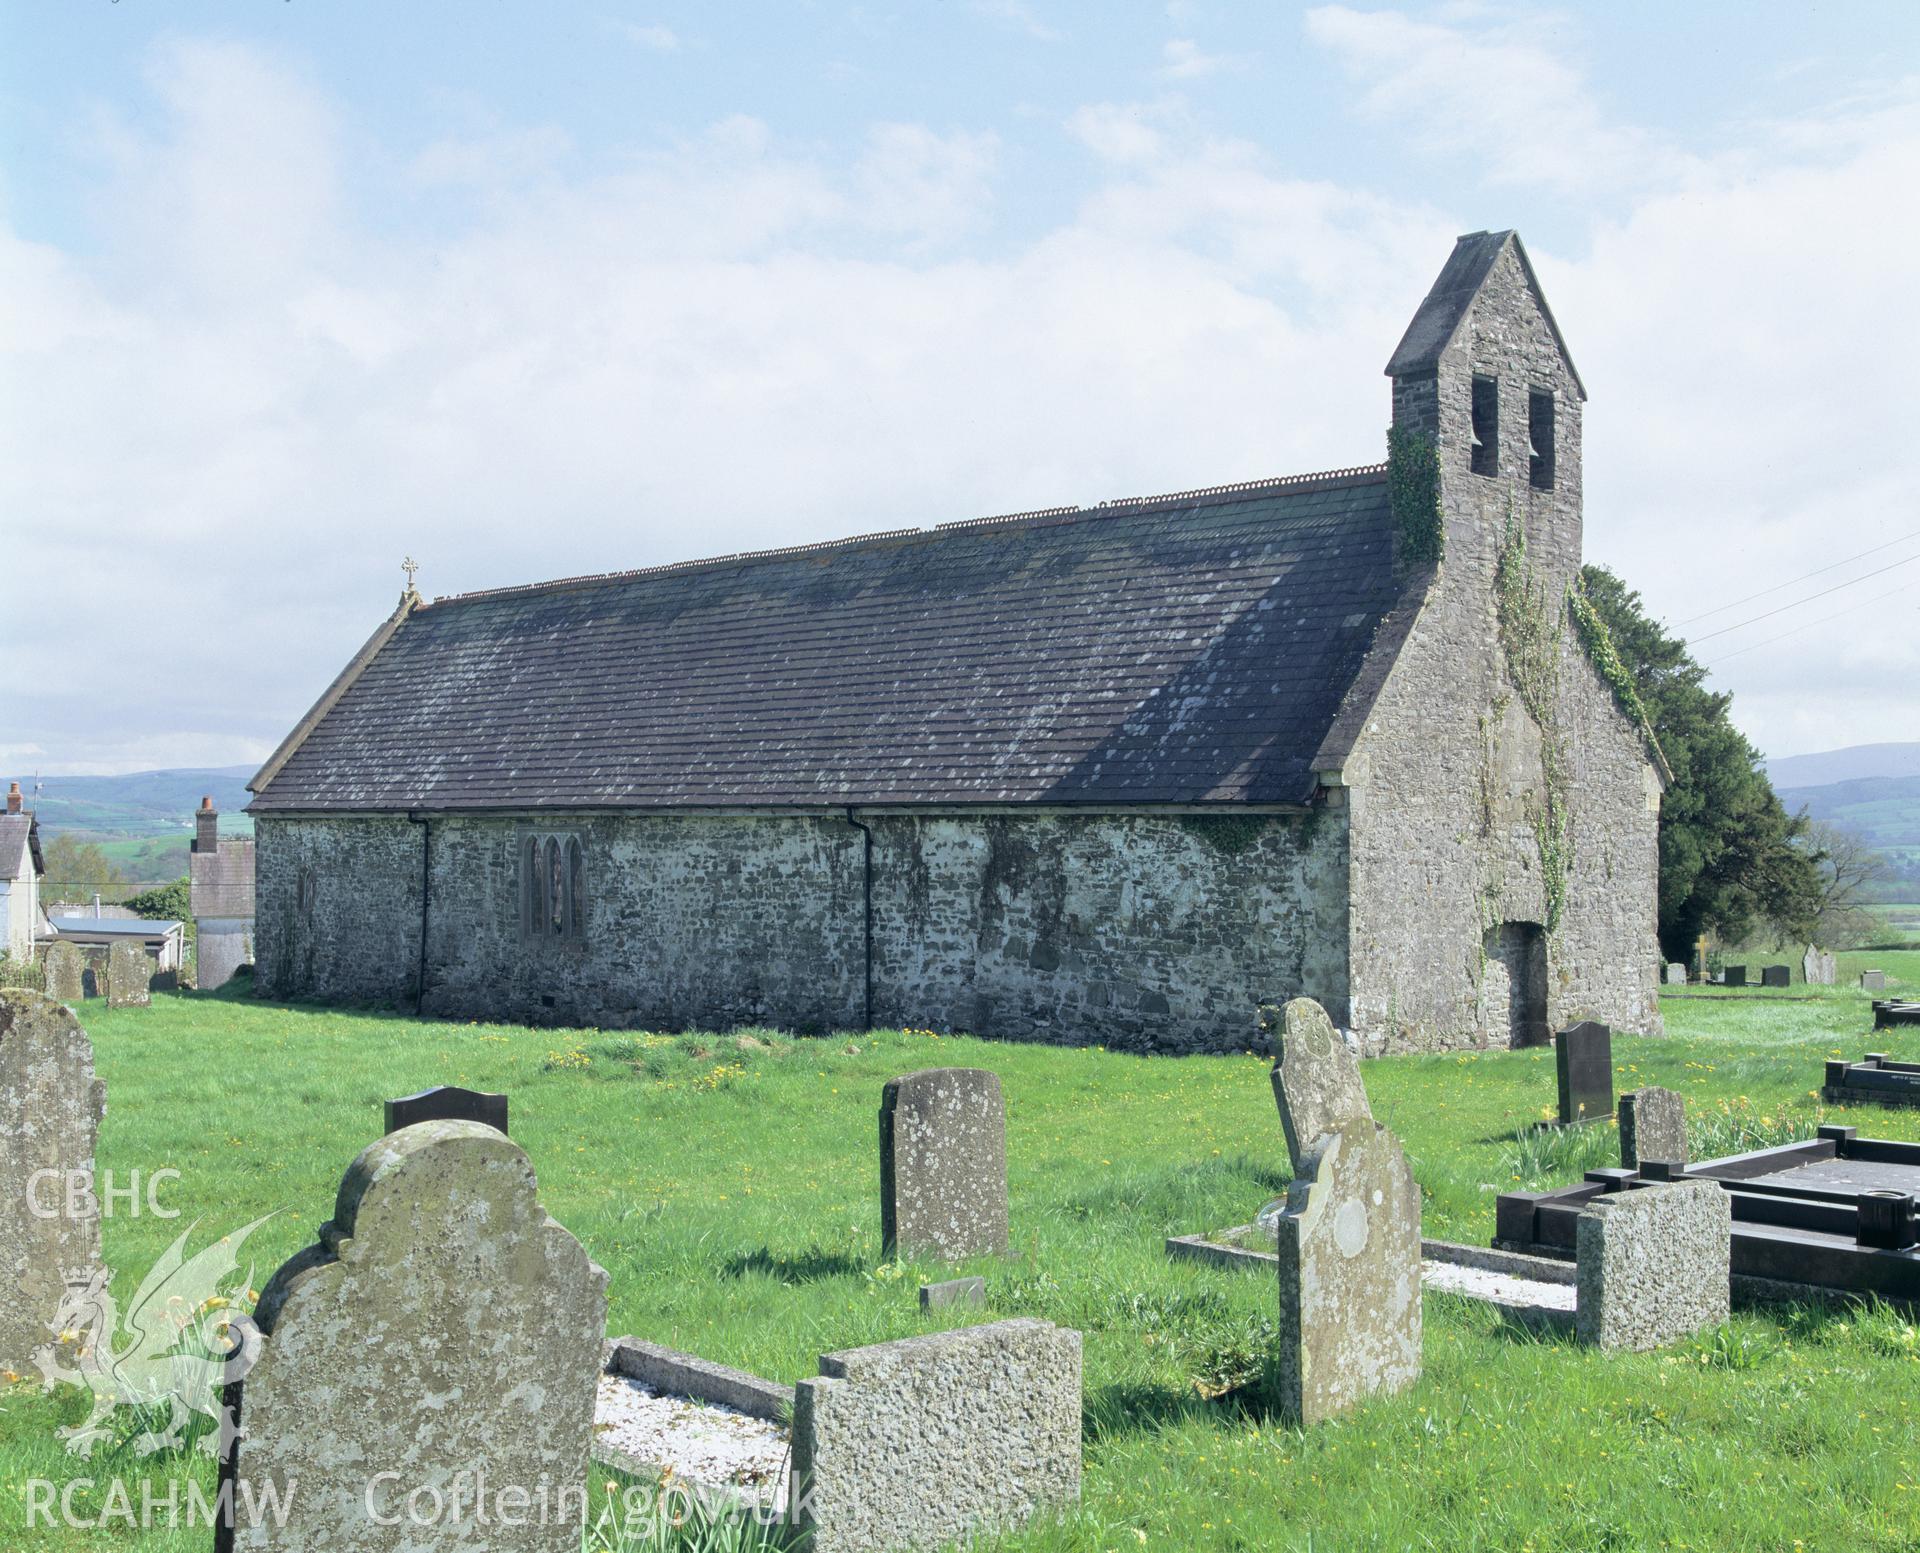 Colour transparency showing an exterior  view of St Sadwrns Church, Llansadwrn, produced by Iain Wright, June 2004.